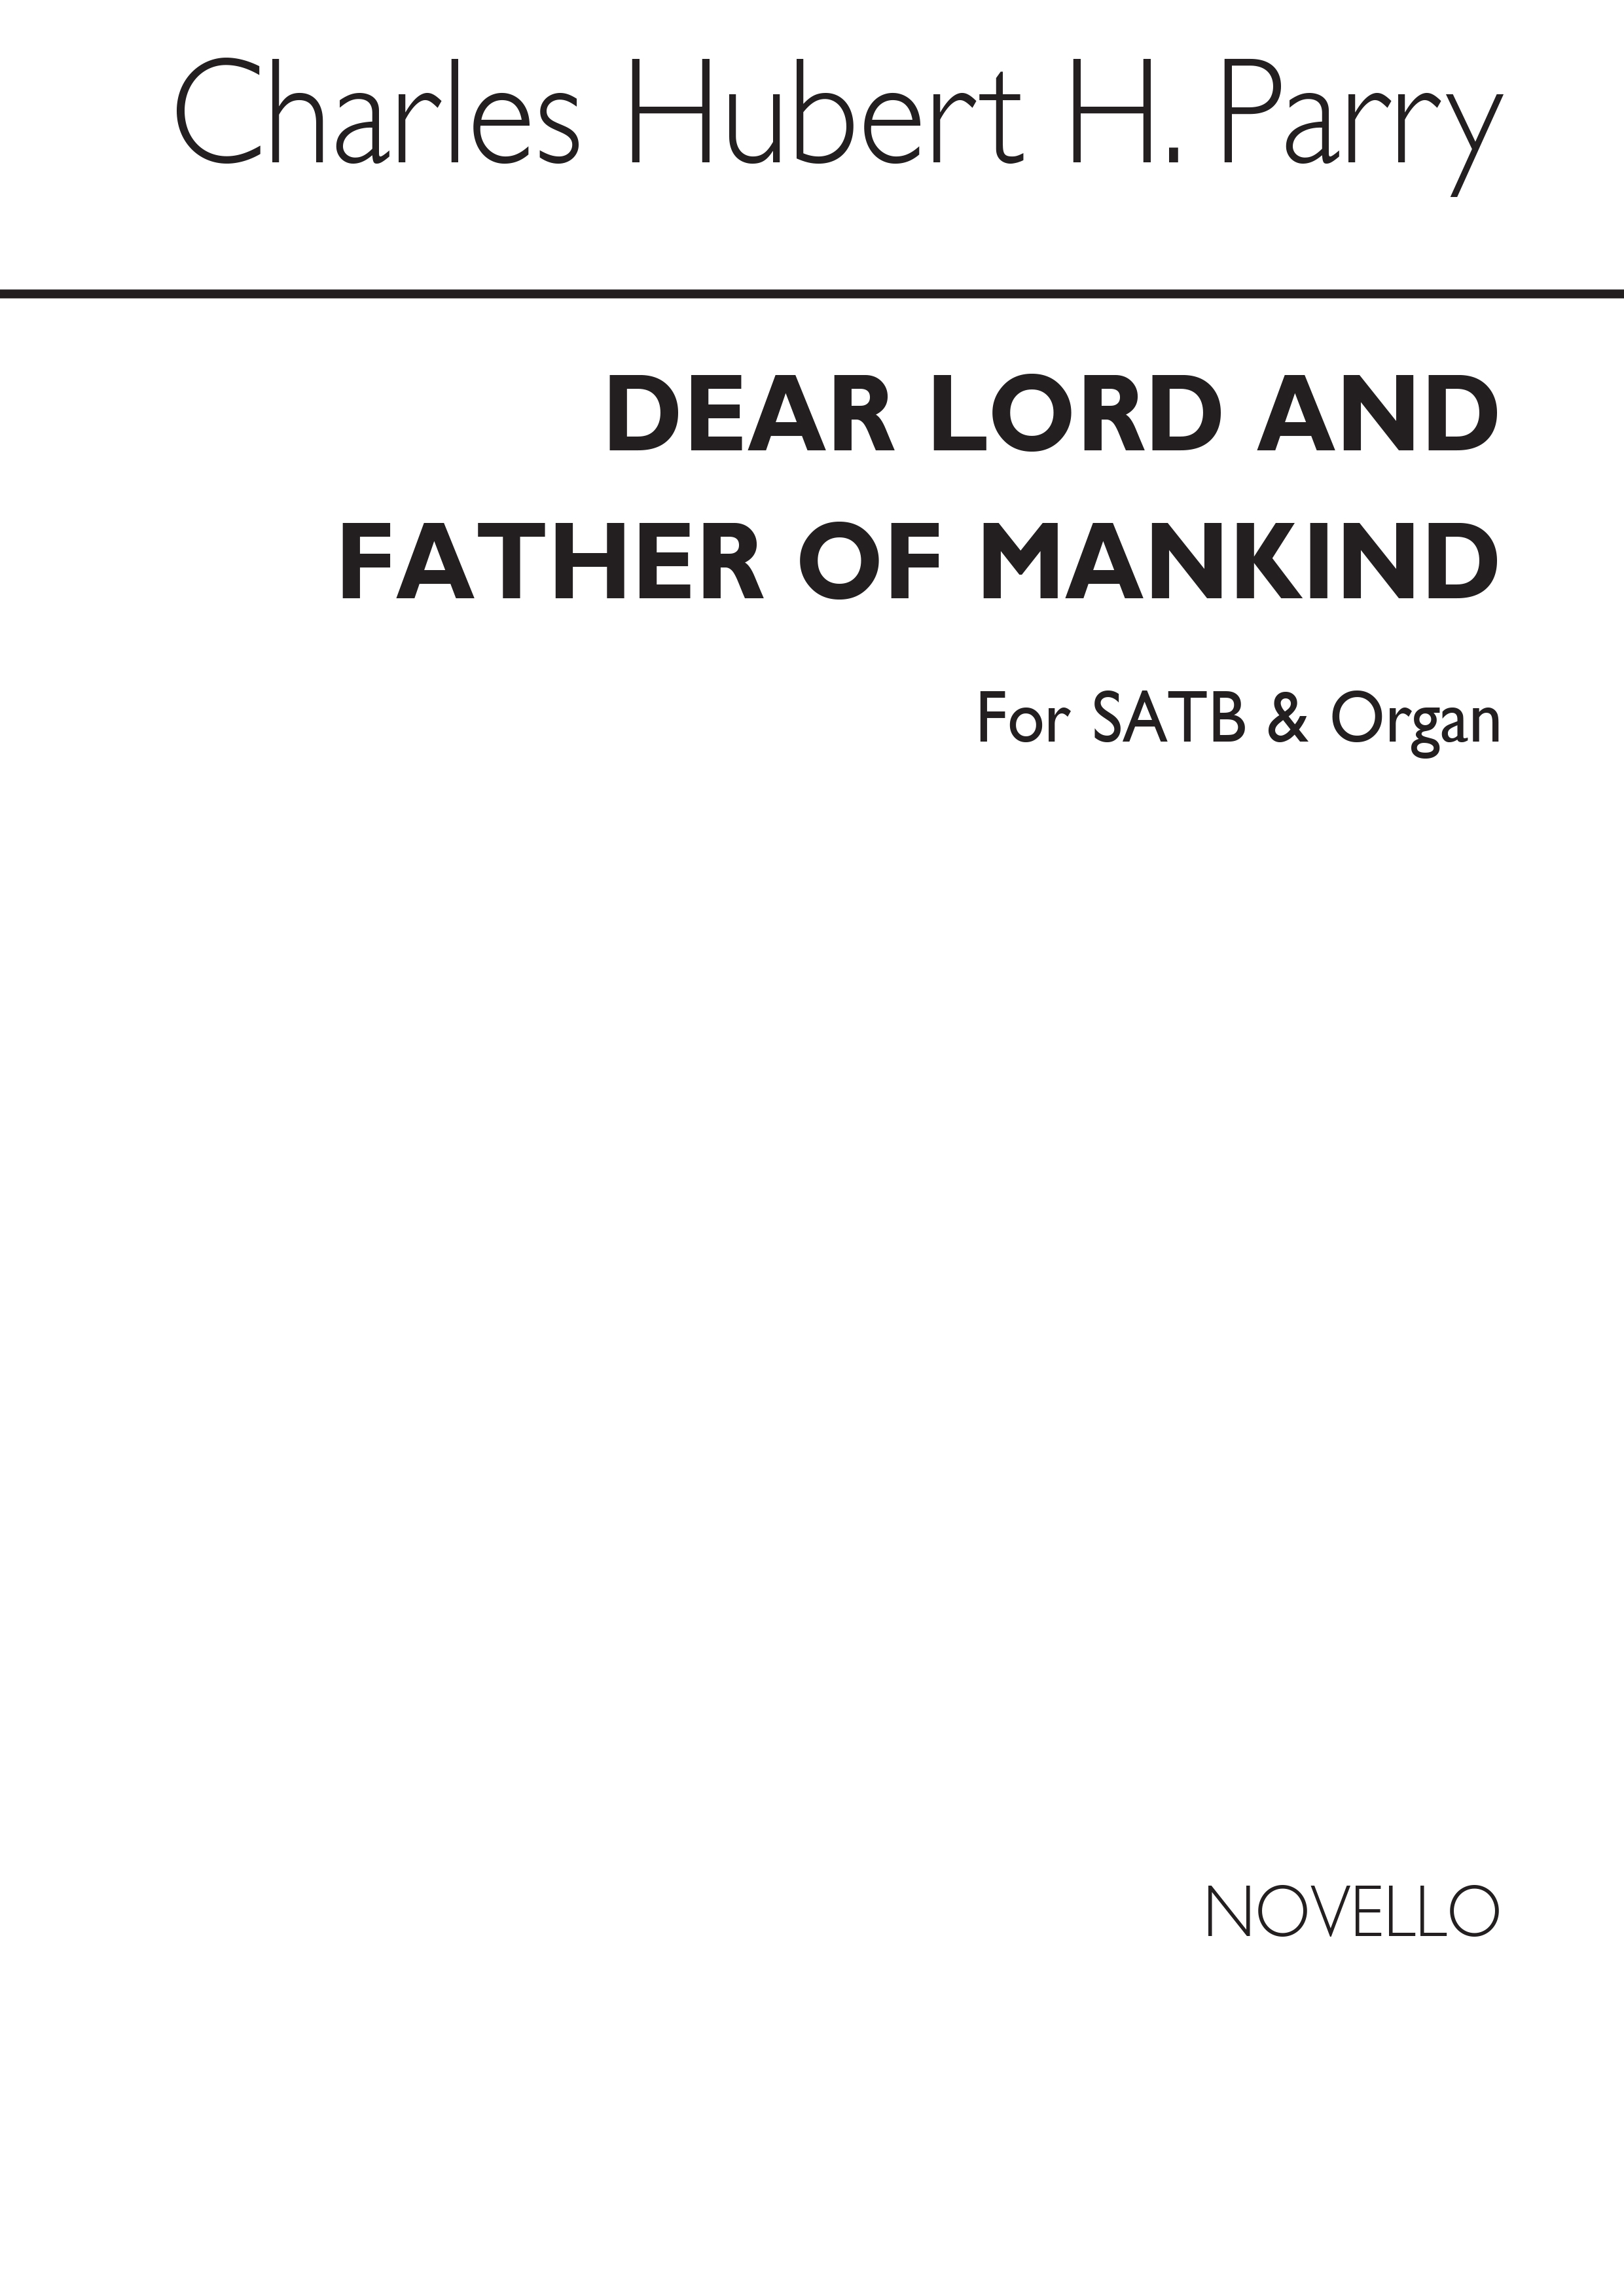 C. Hubert. H. Parry: Dear Lord And Father Of Mankind (Hymn) Satb/Organ